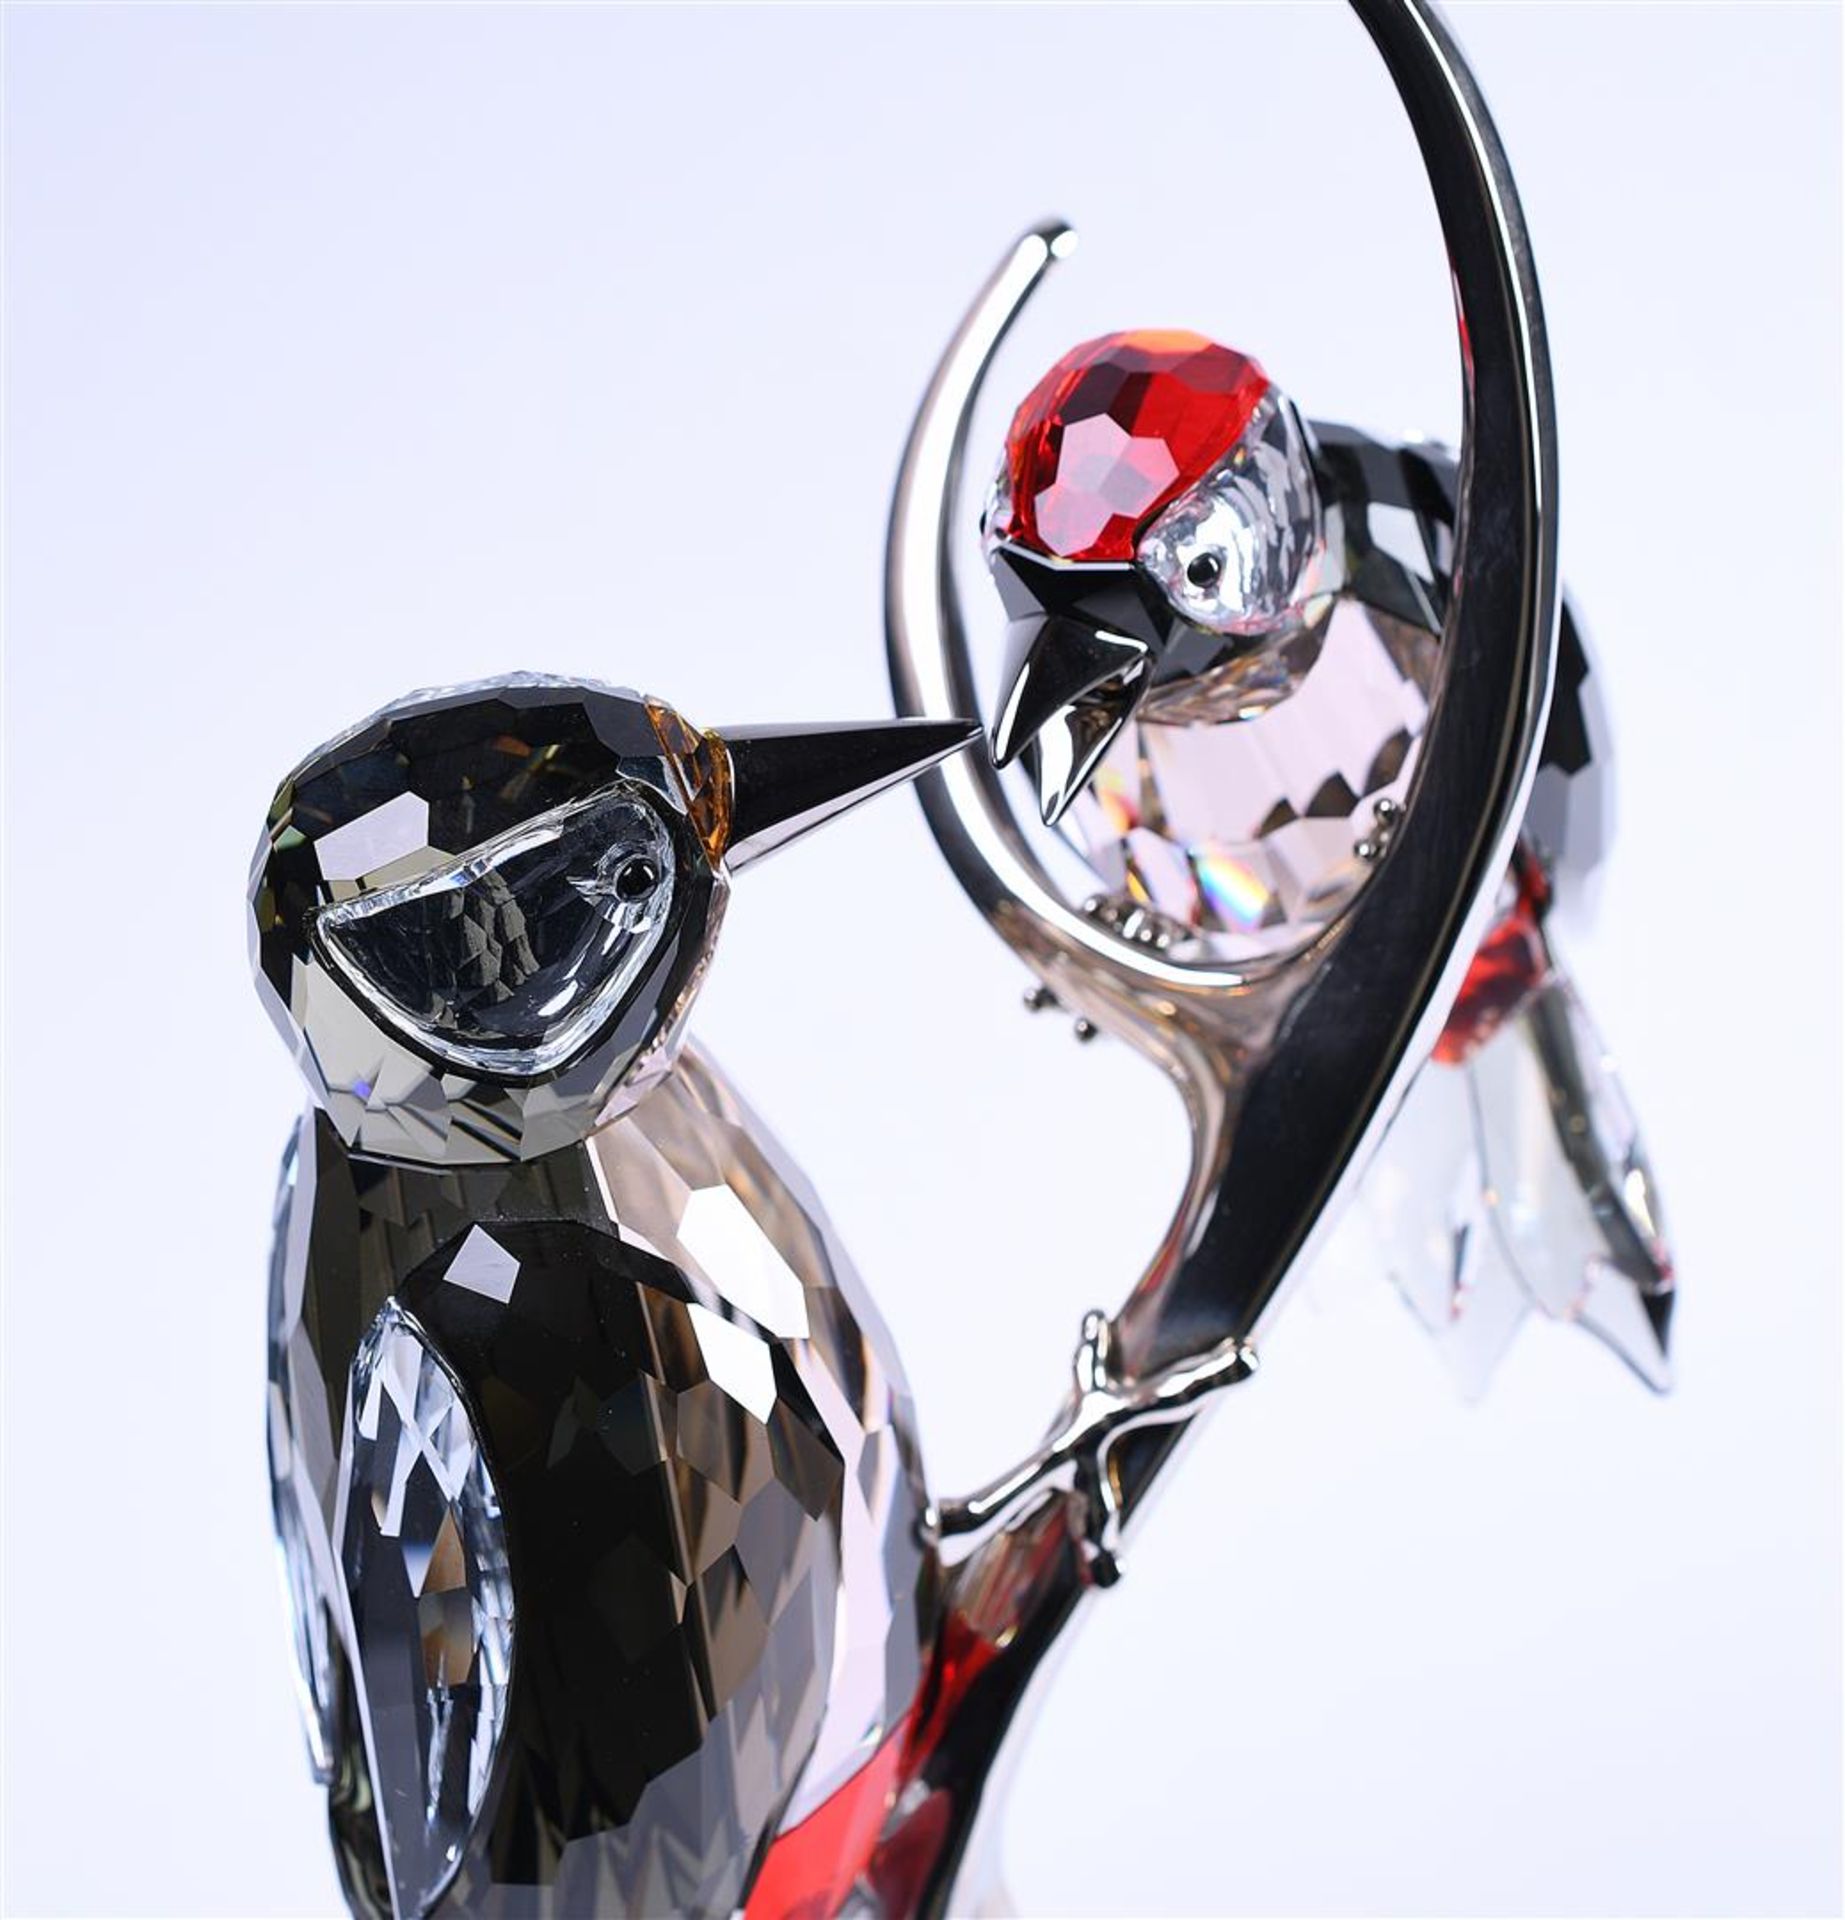 Swarovski, woodpeckers, Year of issue 2009,957562. Includes original box.
H. 21,9 cm. - Image 6 of 9